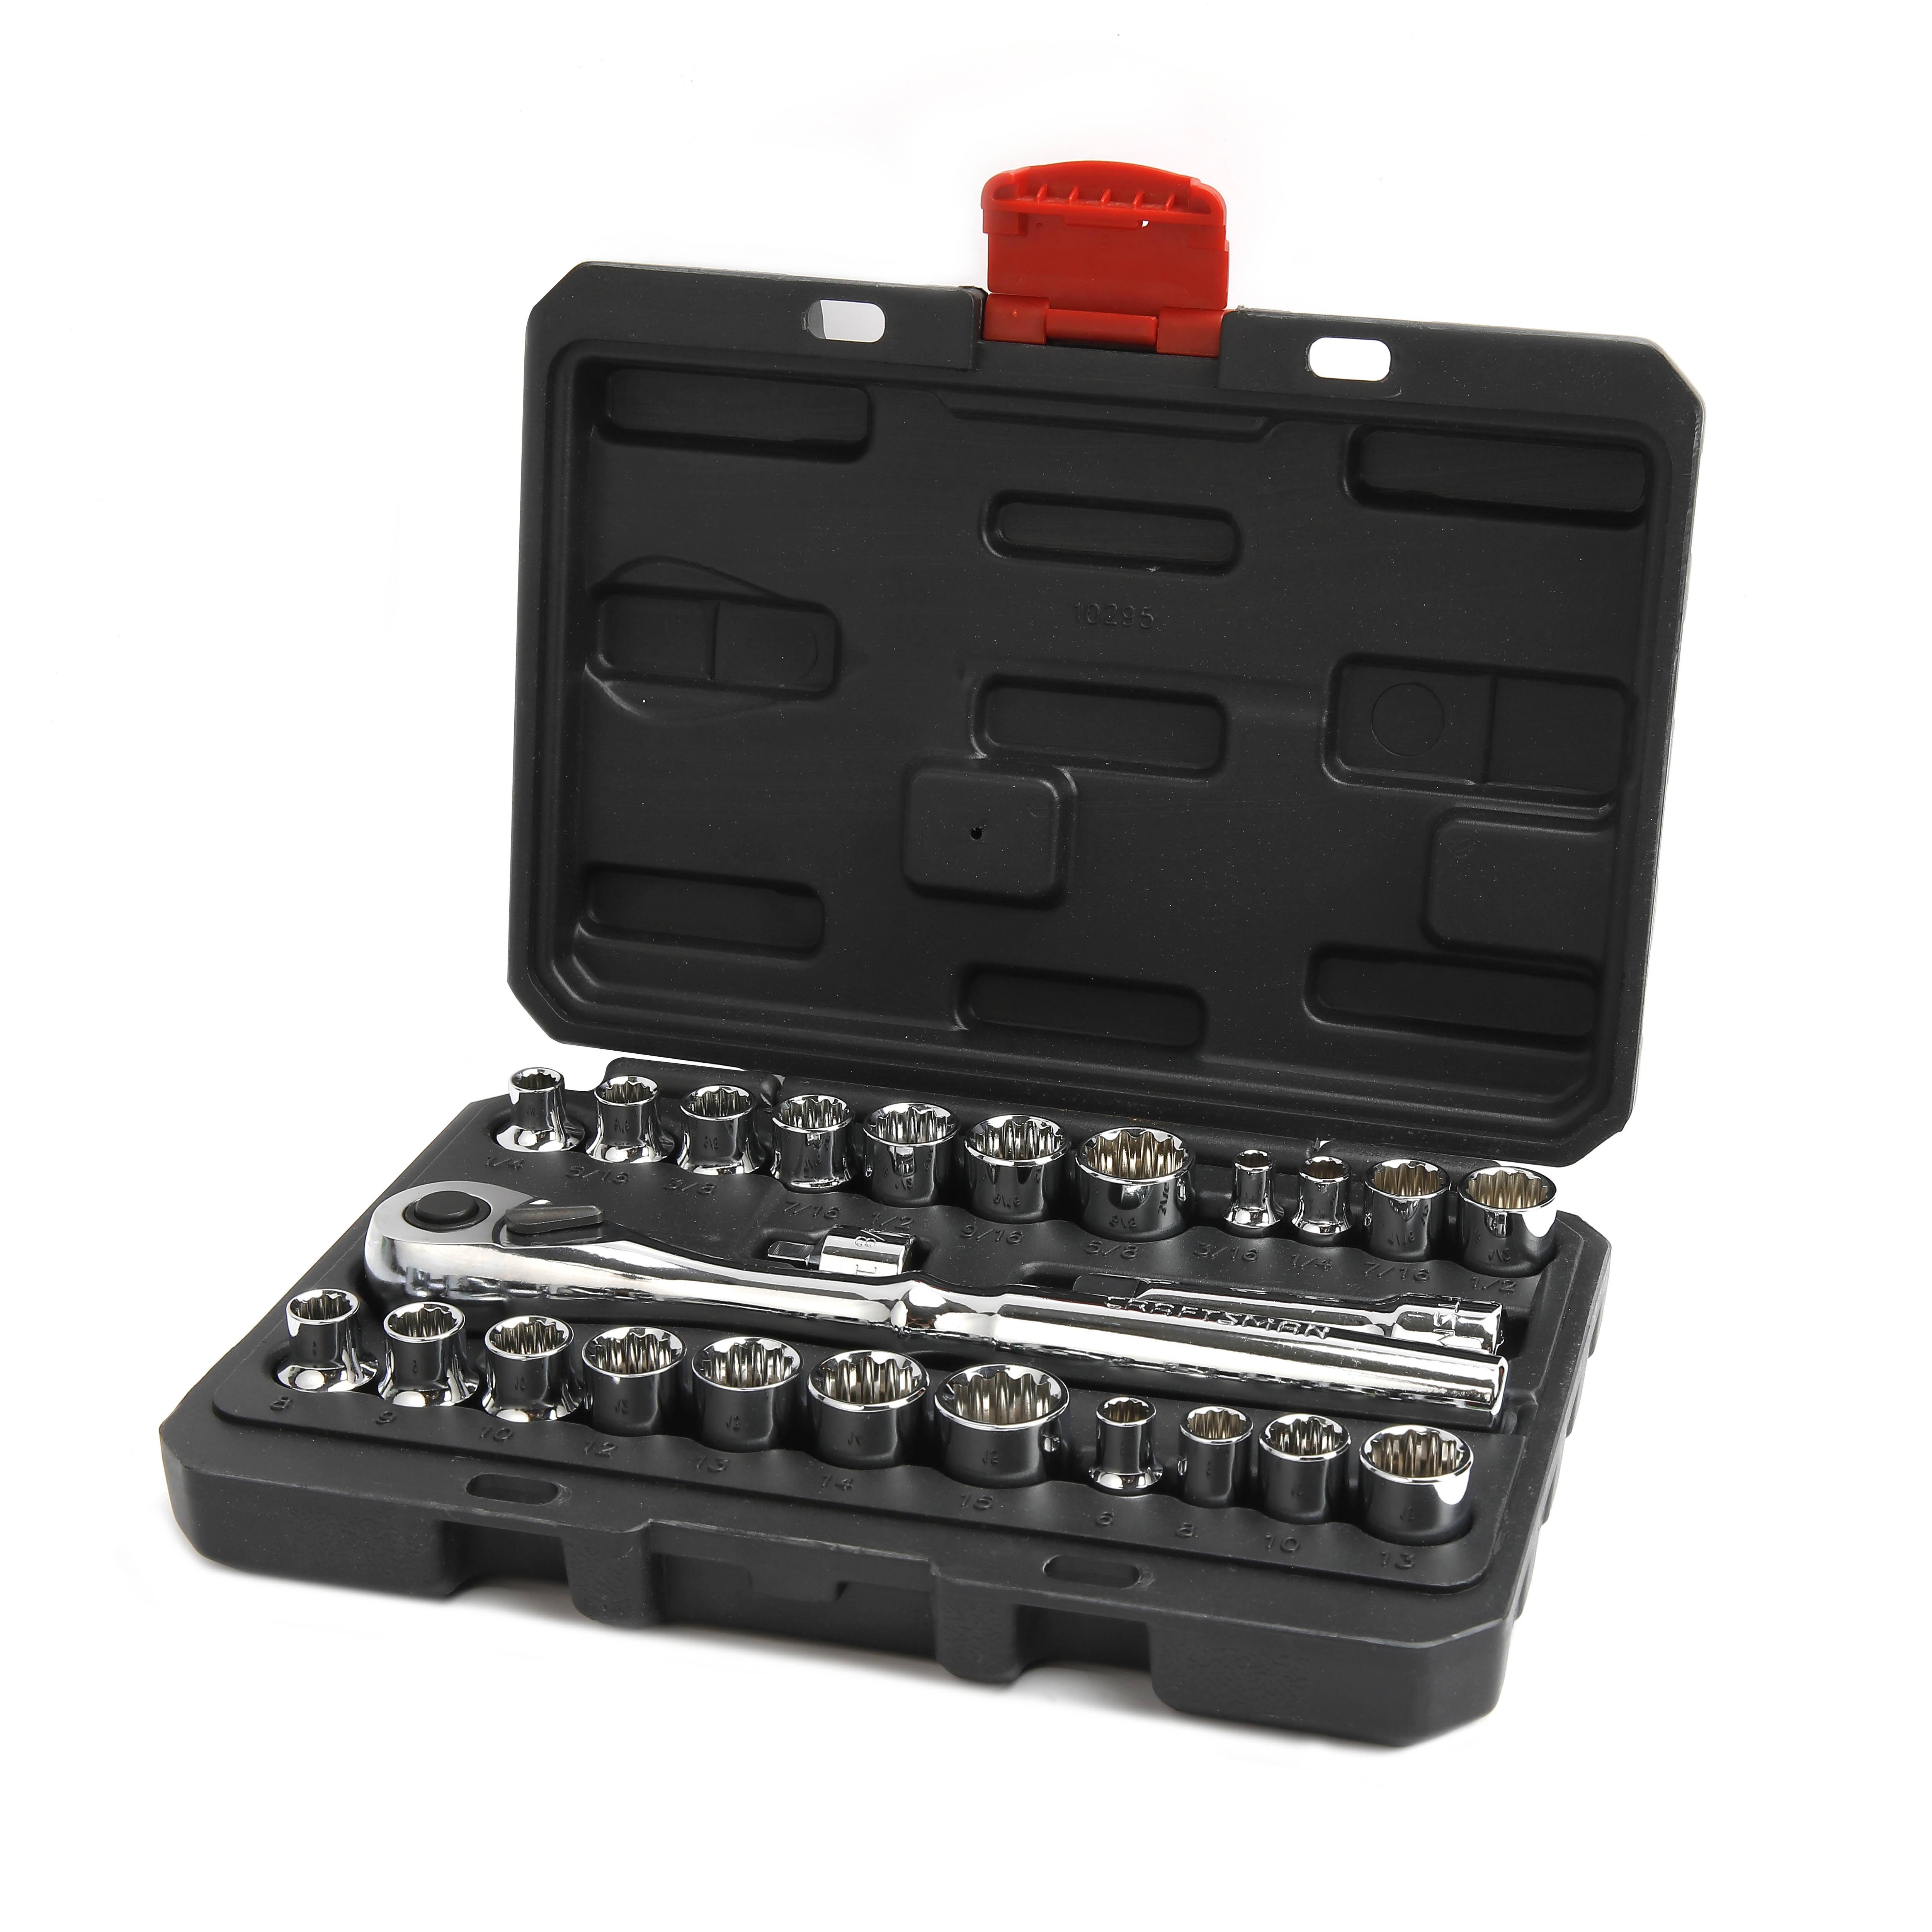 Compact Craftsman 25-Piece Socket Wrench Set - Powder Coated and Versatile with Fixed and Hex Head Options | Image